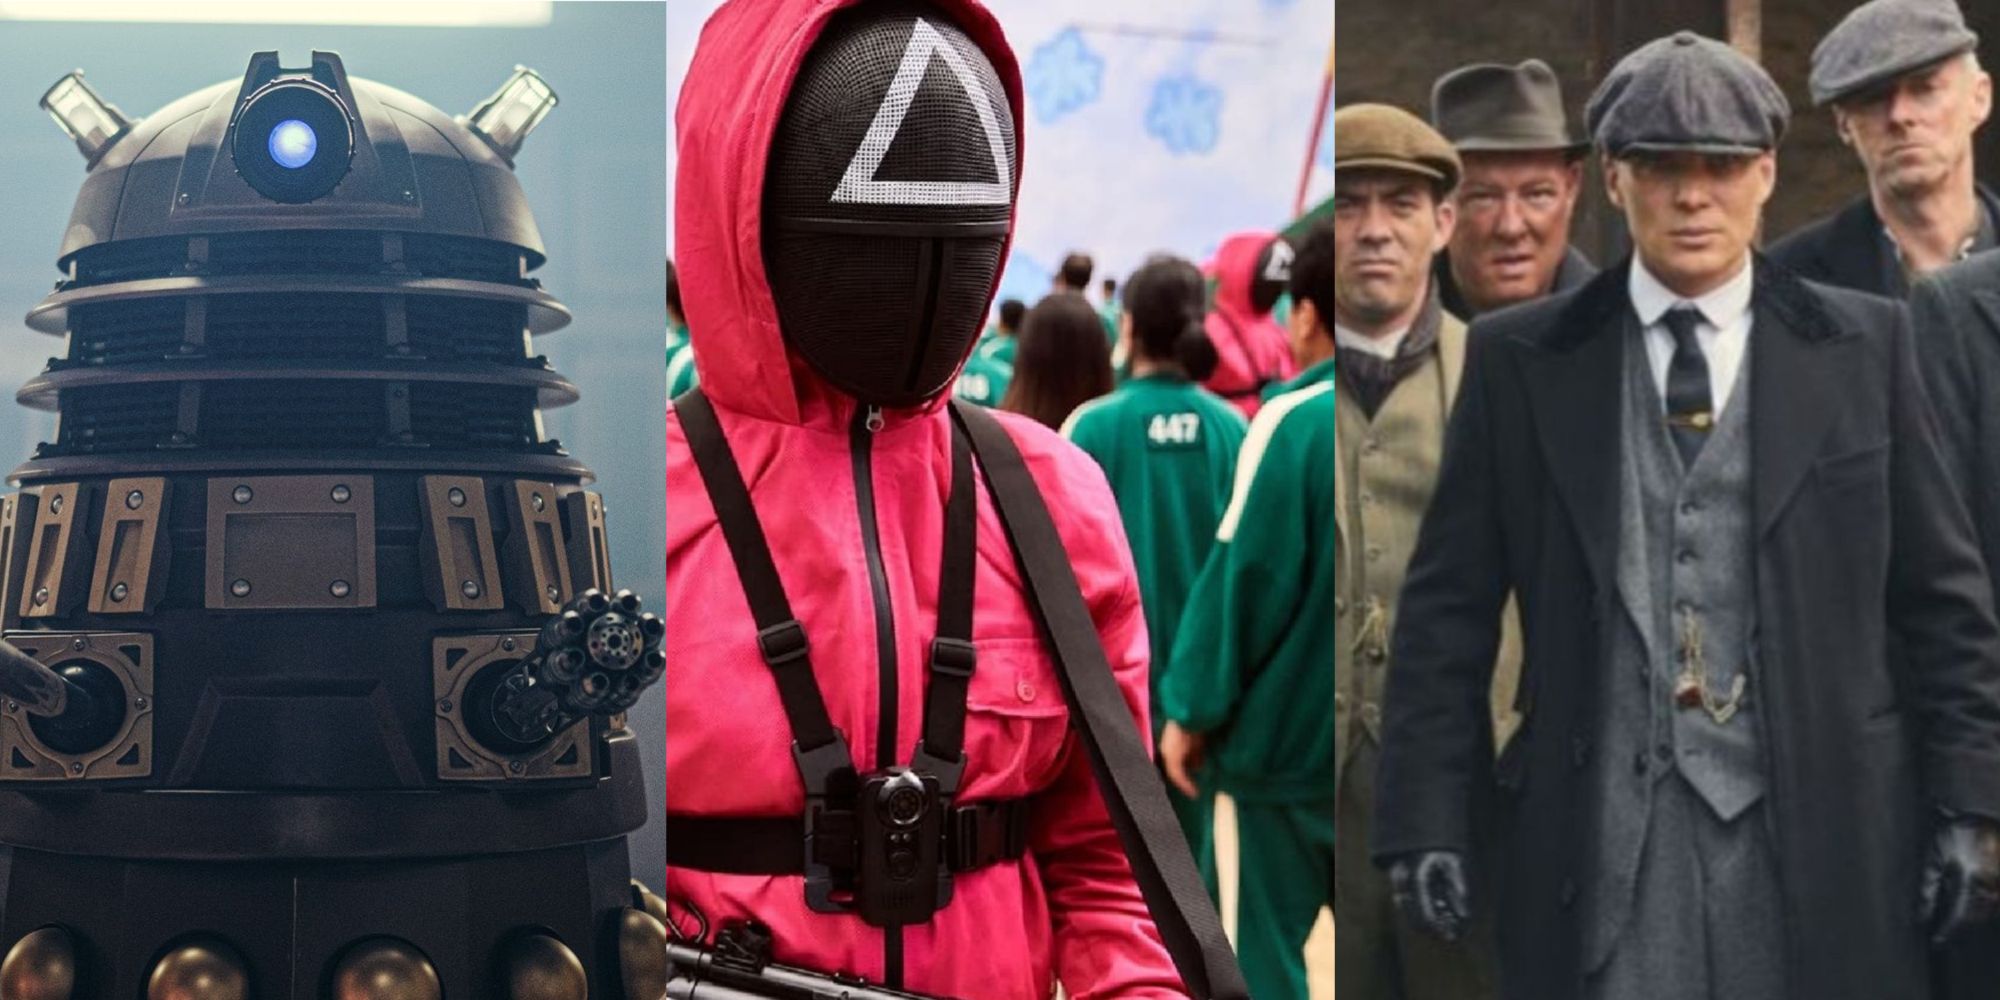 A three-image collage featuring a Dalek from Doctor Who, a Guard with contestants lined up behind them in Squid Game, and Tommy Shelby rolling with fellow gangsters in Peaky Blinders.